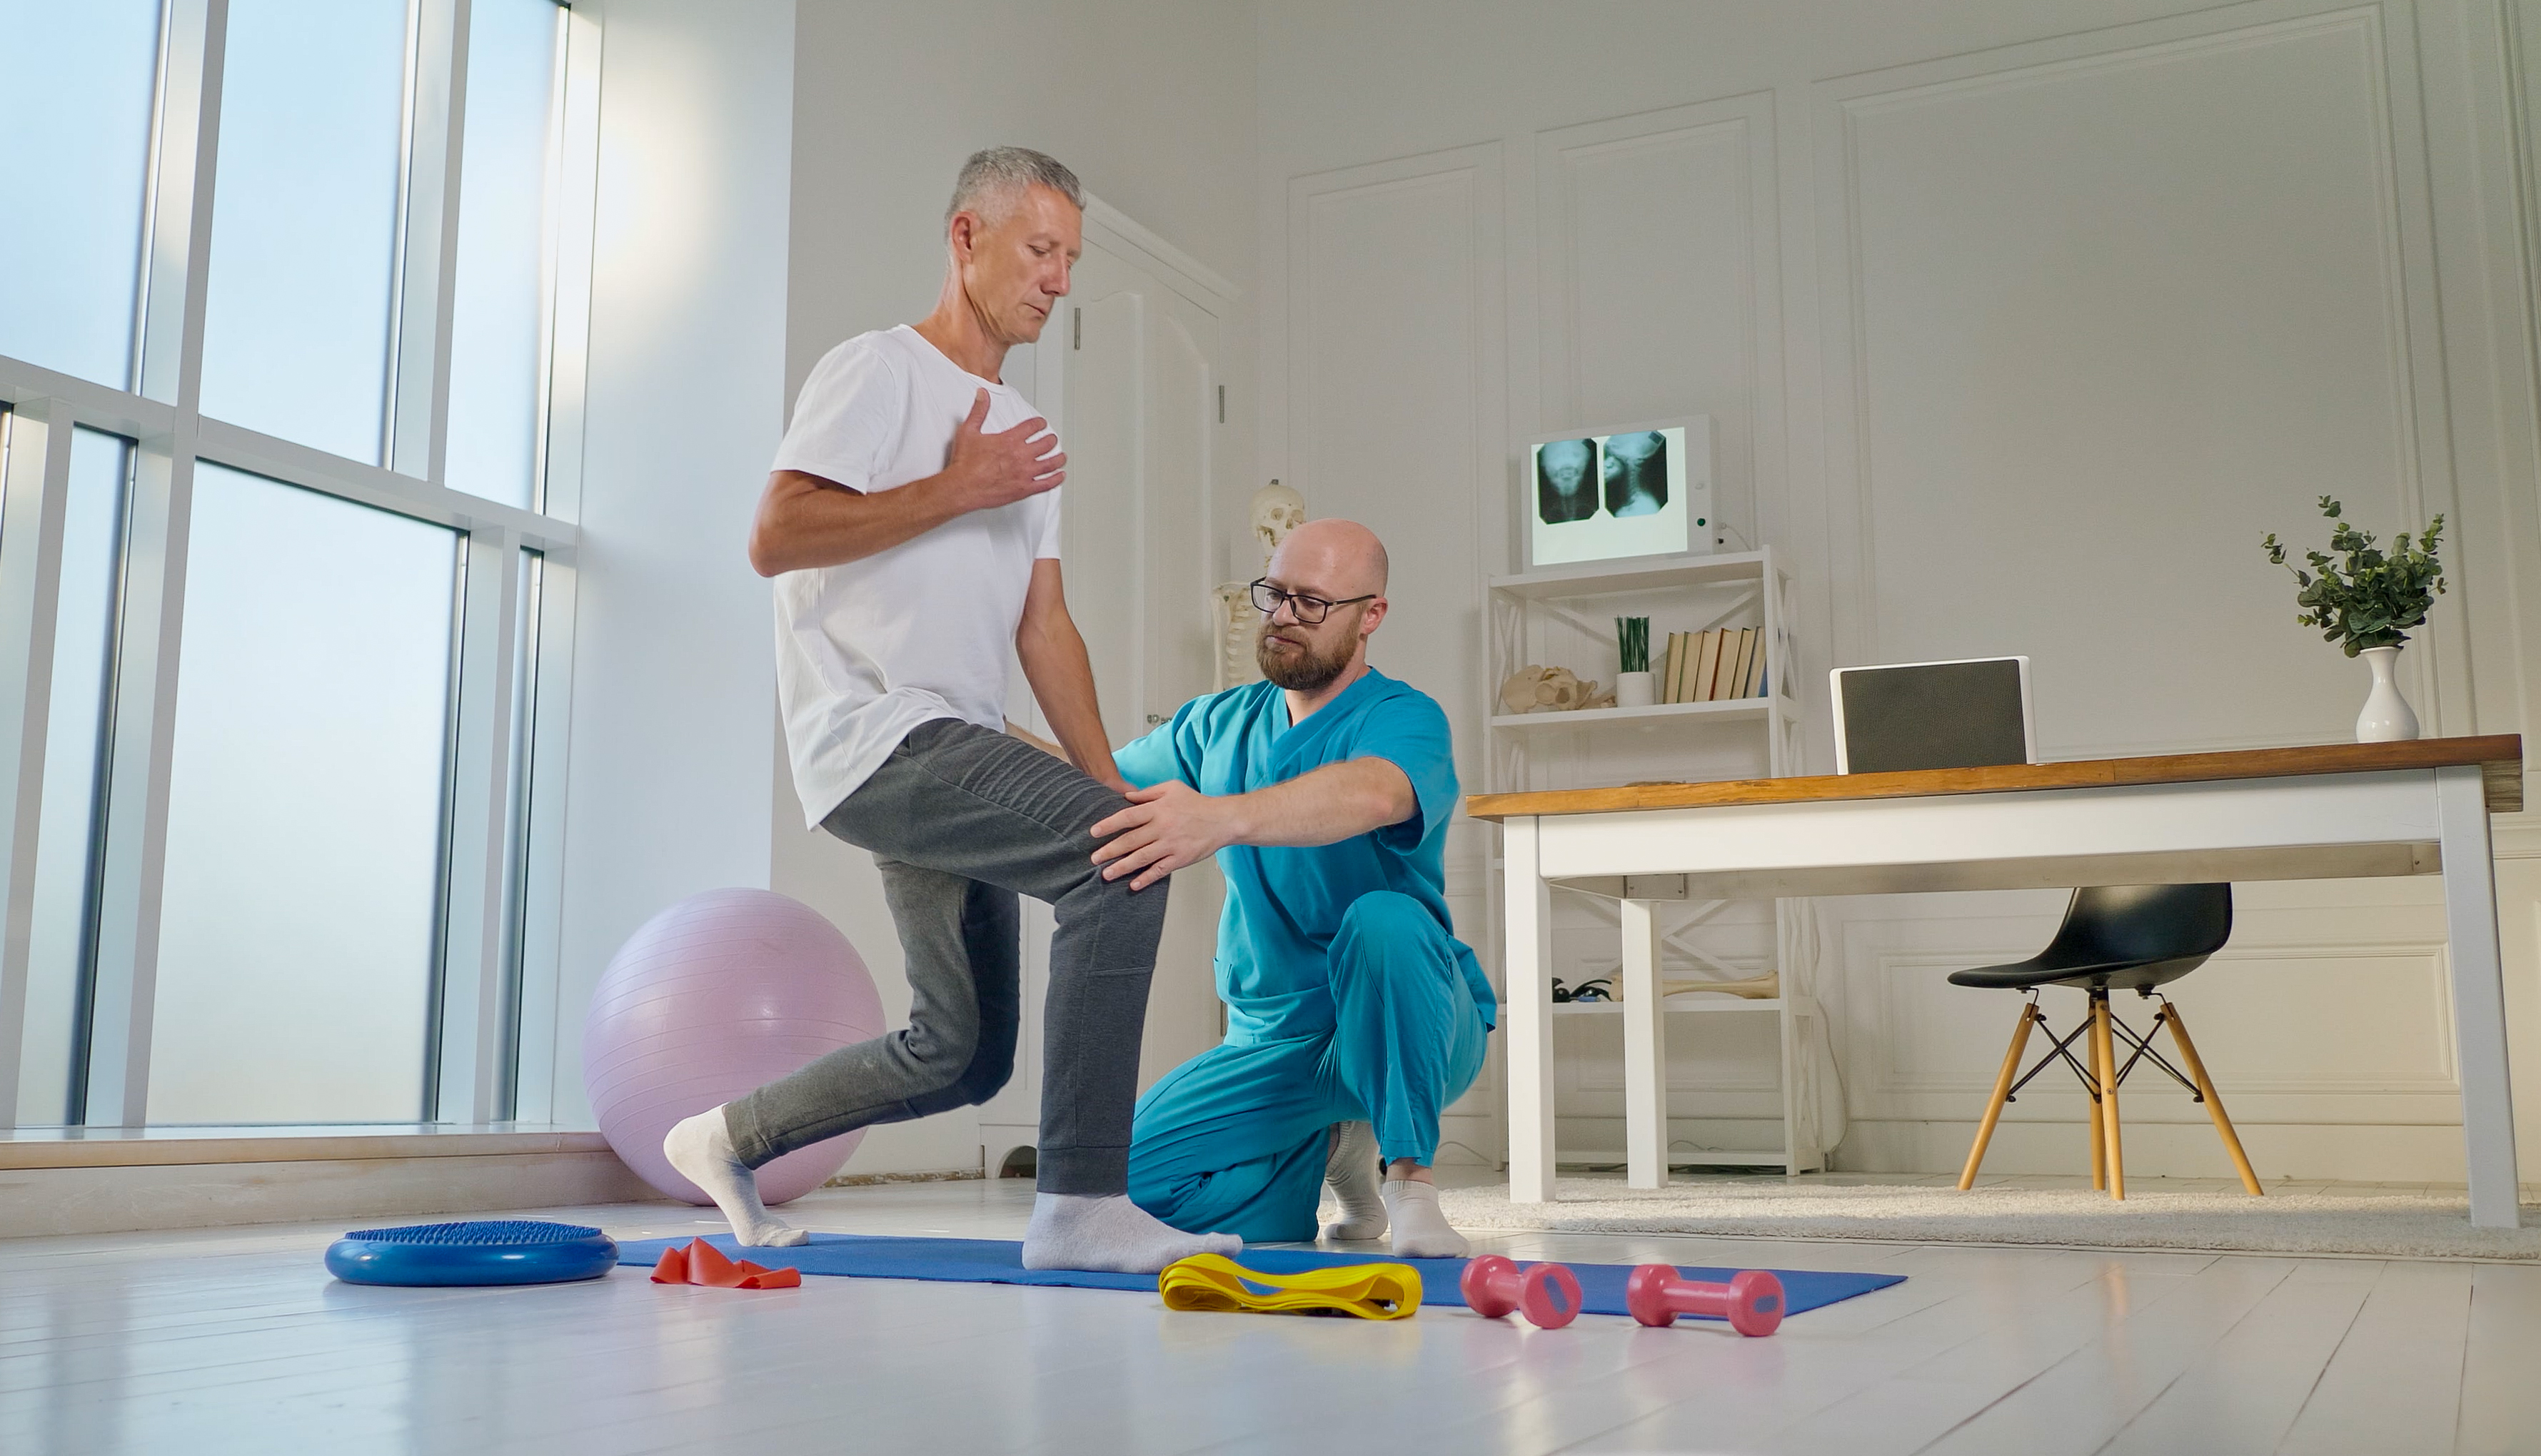 physical-therapist-safely-trains-patient-using-medical-exercise-equipment-rehabilitation